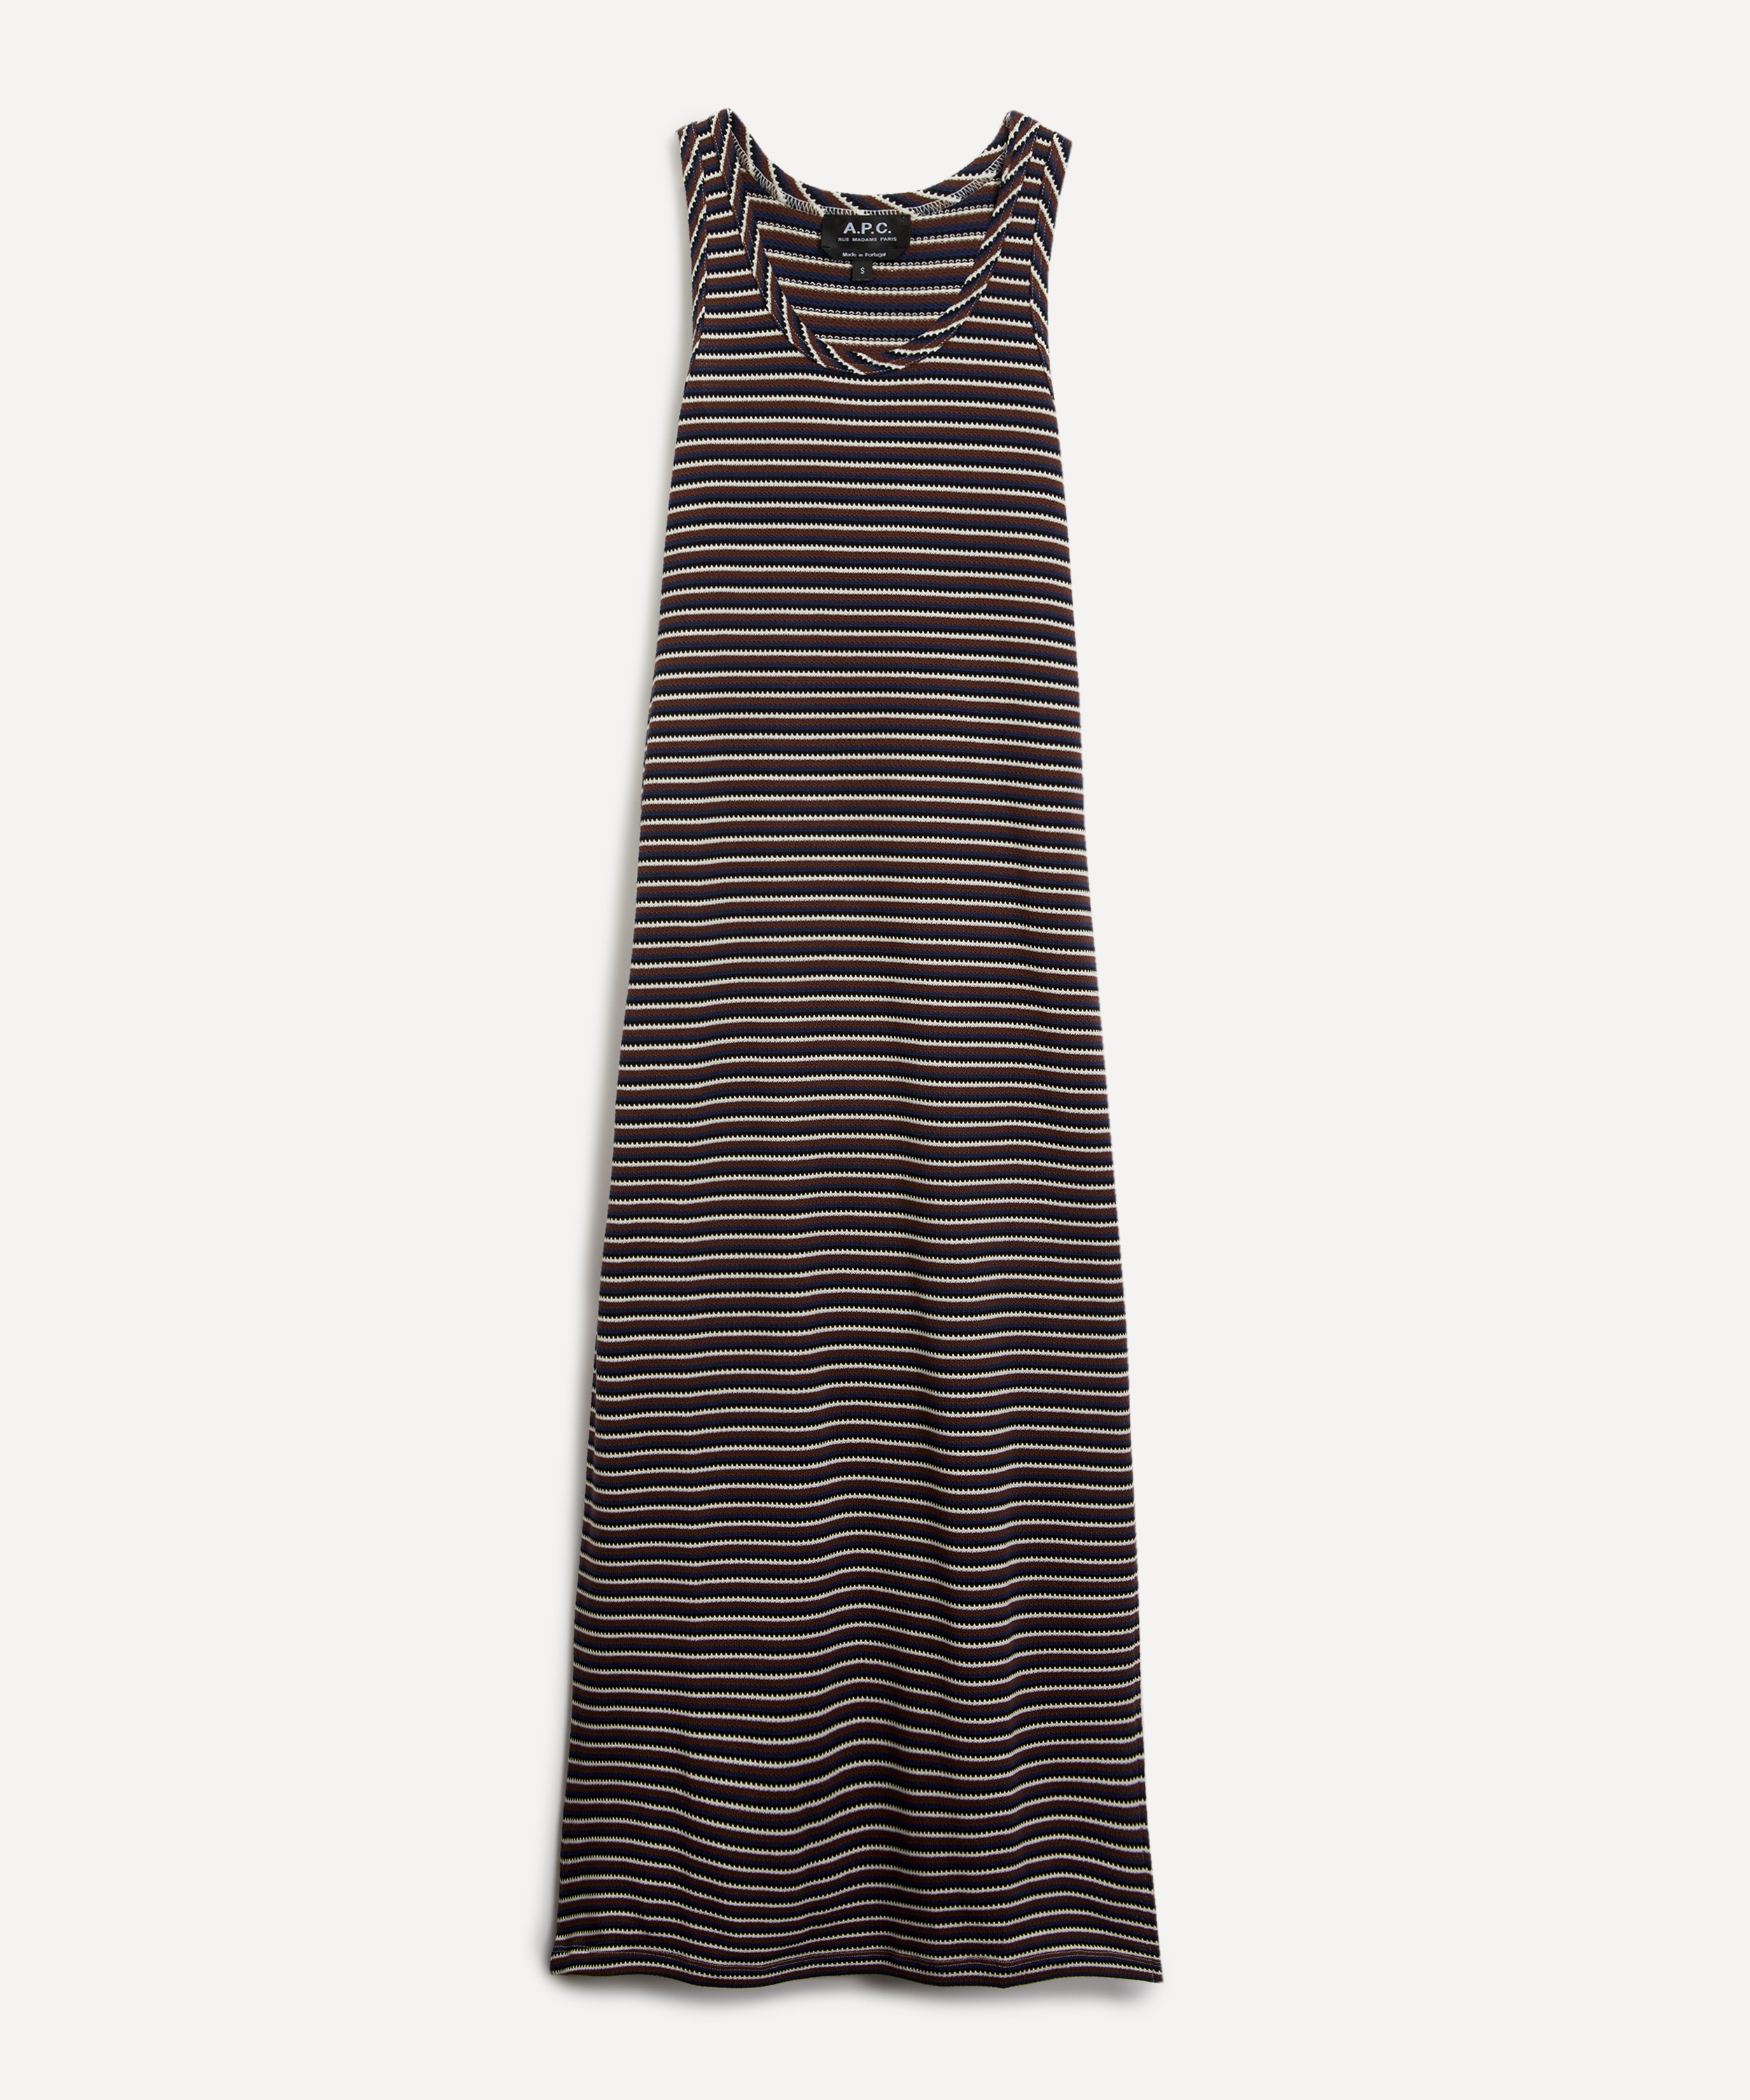 A.P.C. - Shelly Dress image number 0